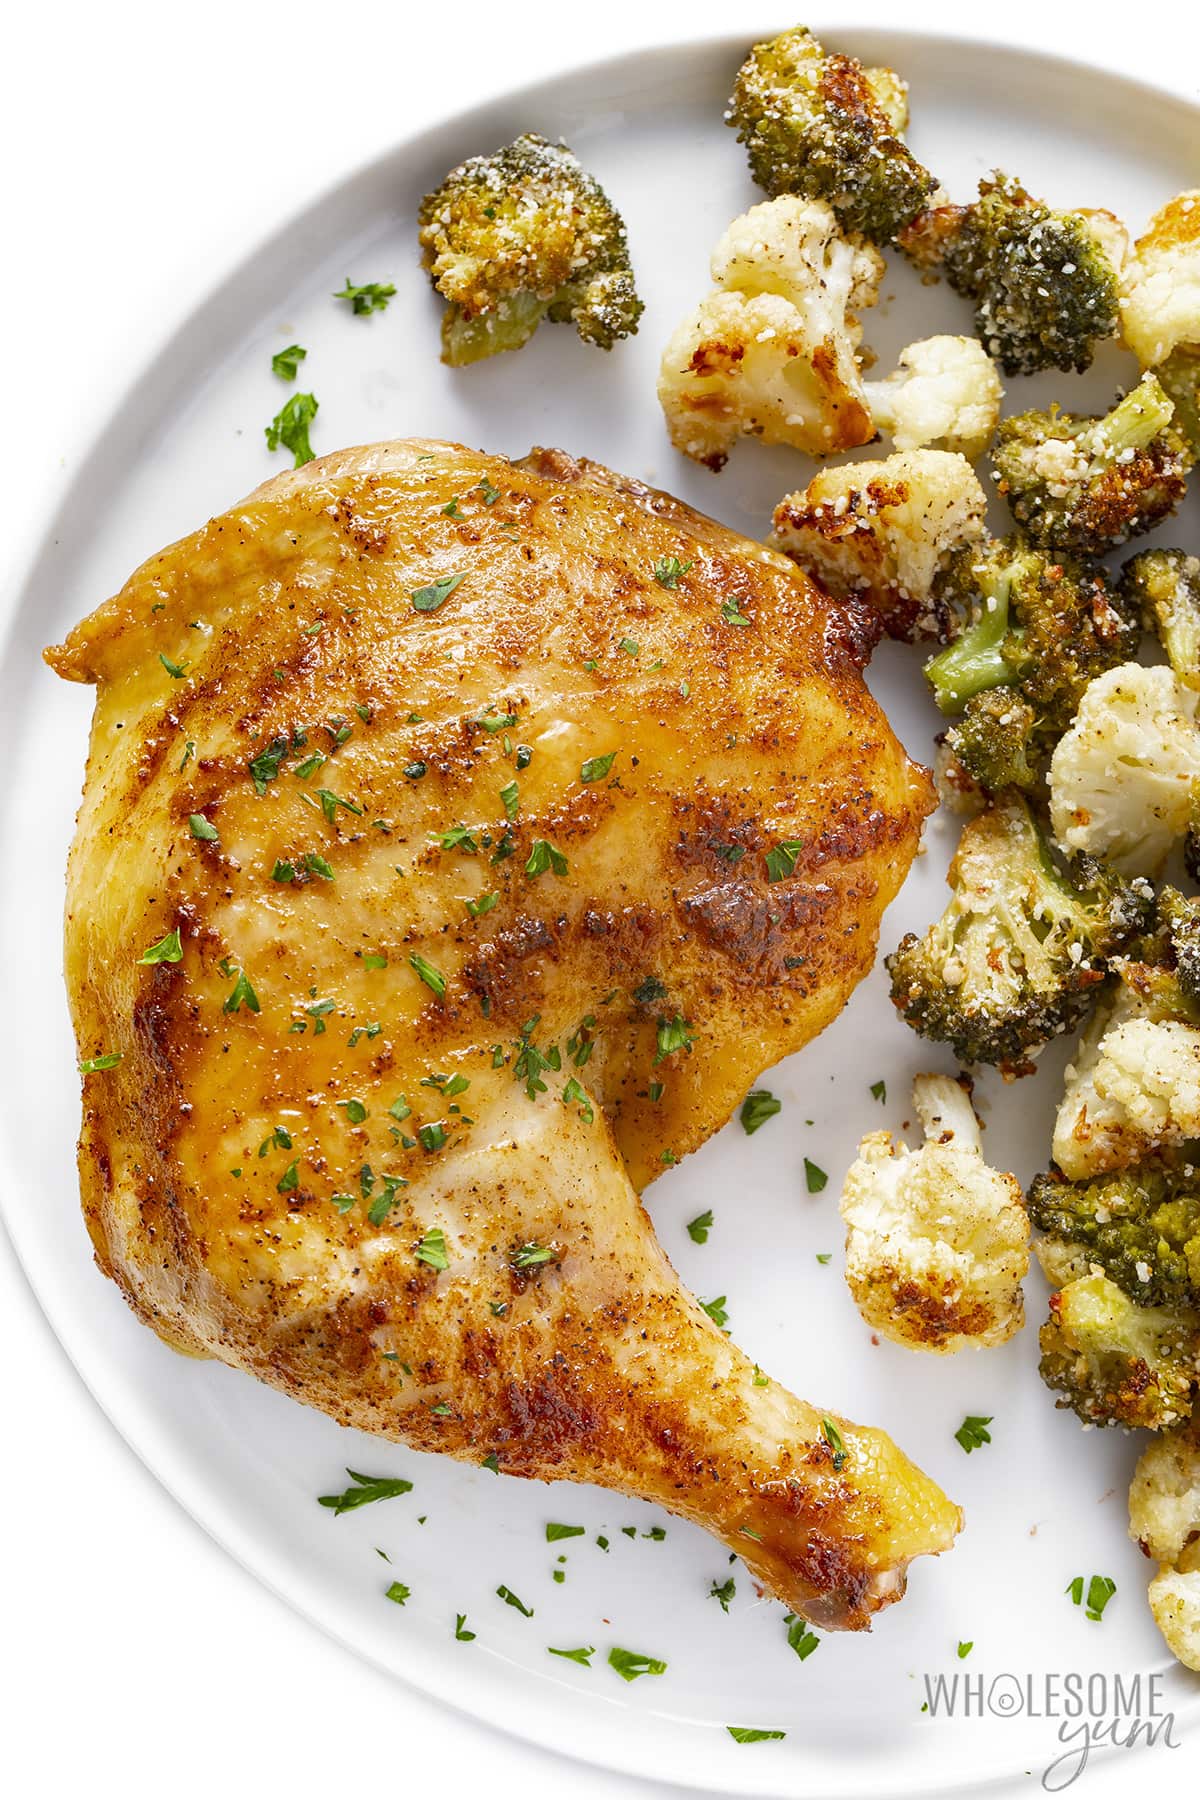 Oven baked chicken leg quarters plated with broccoli and cauliflower.